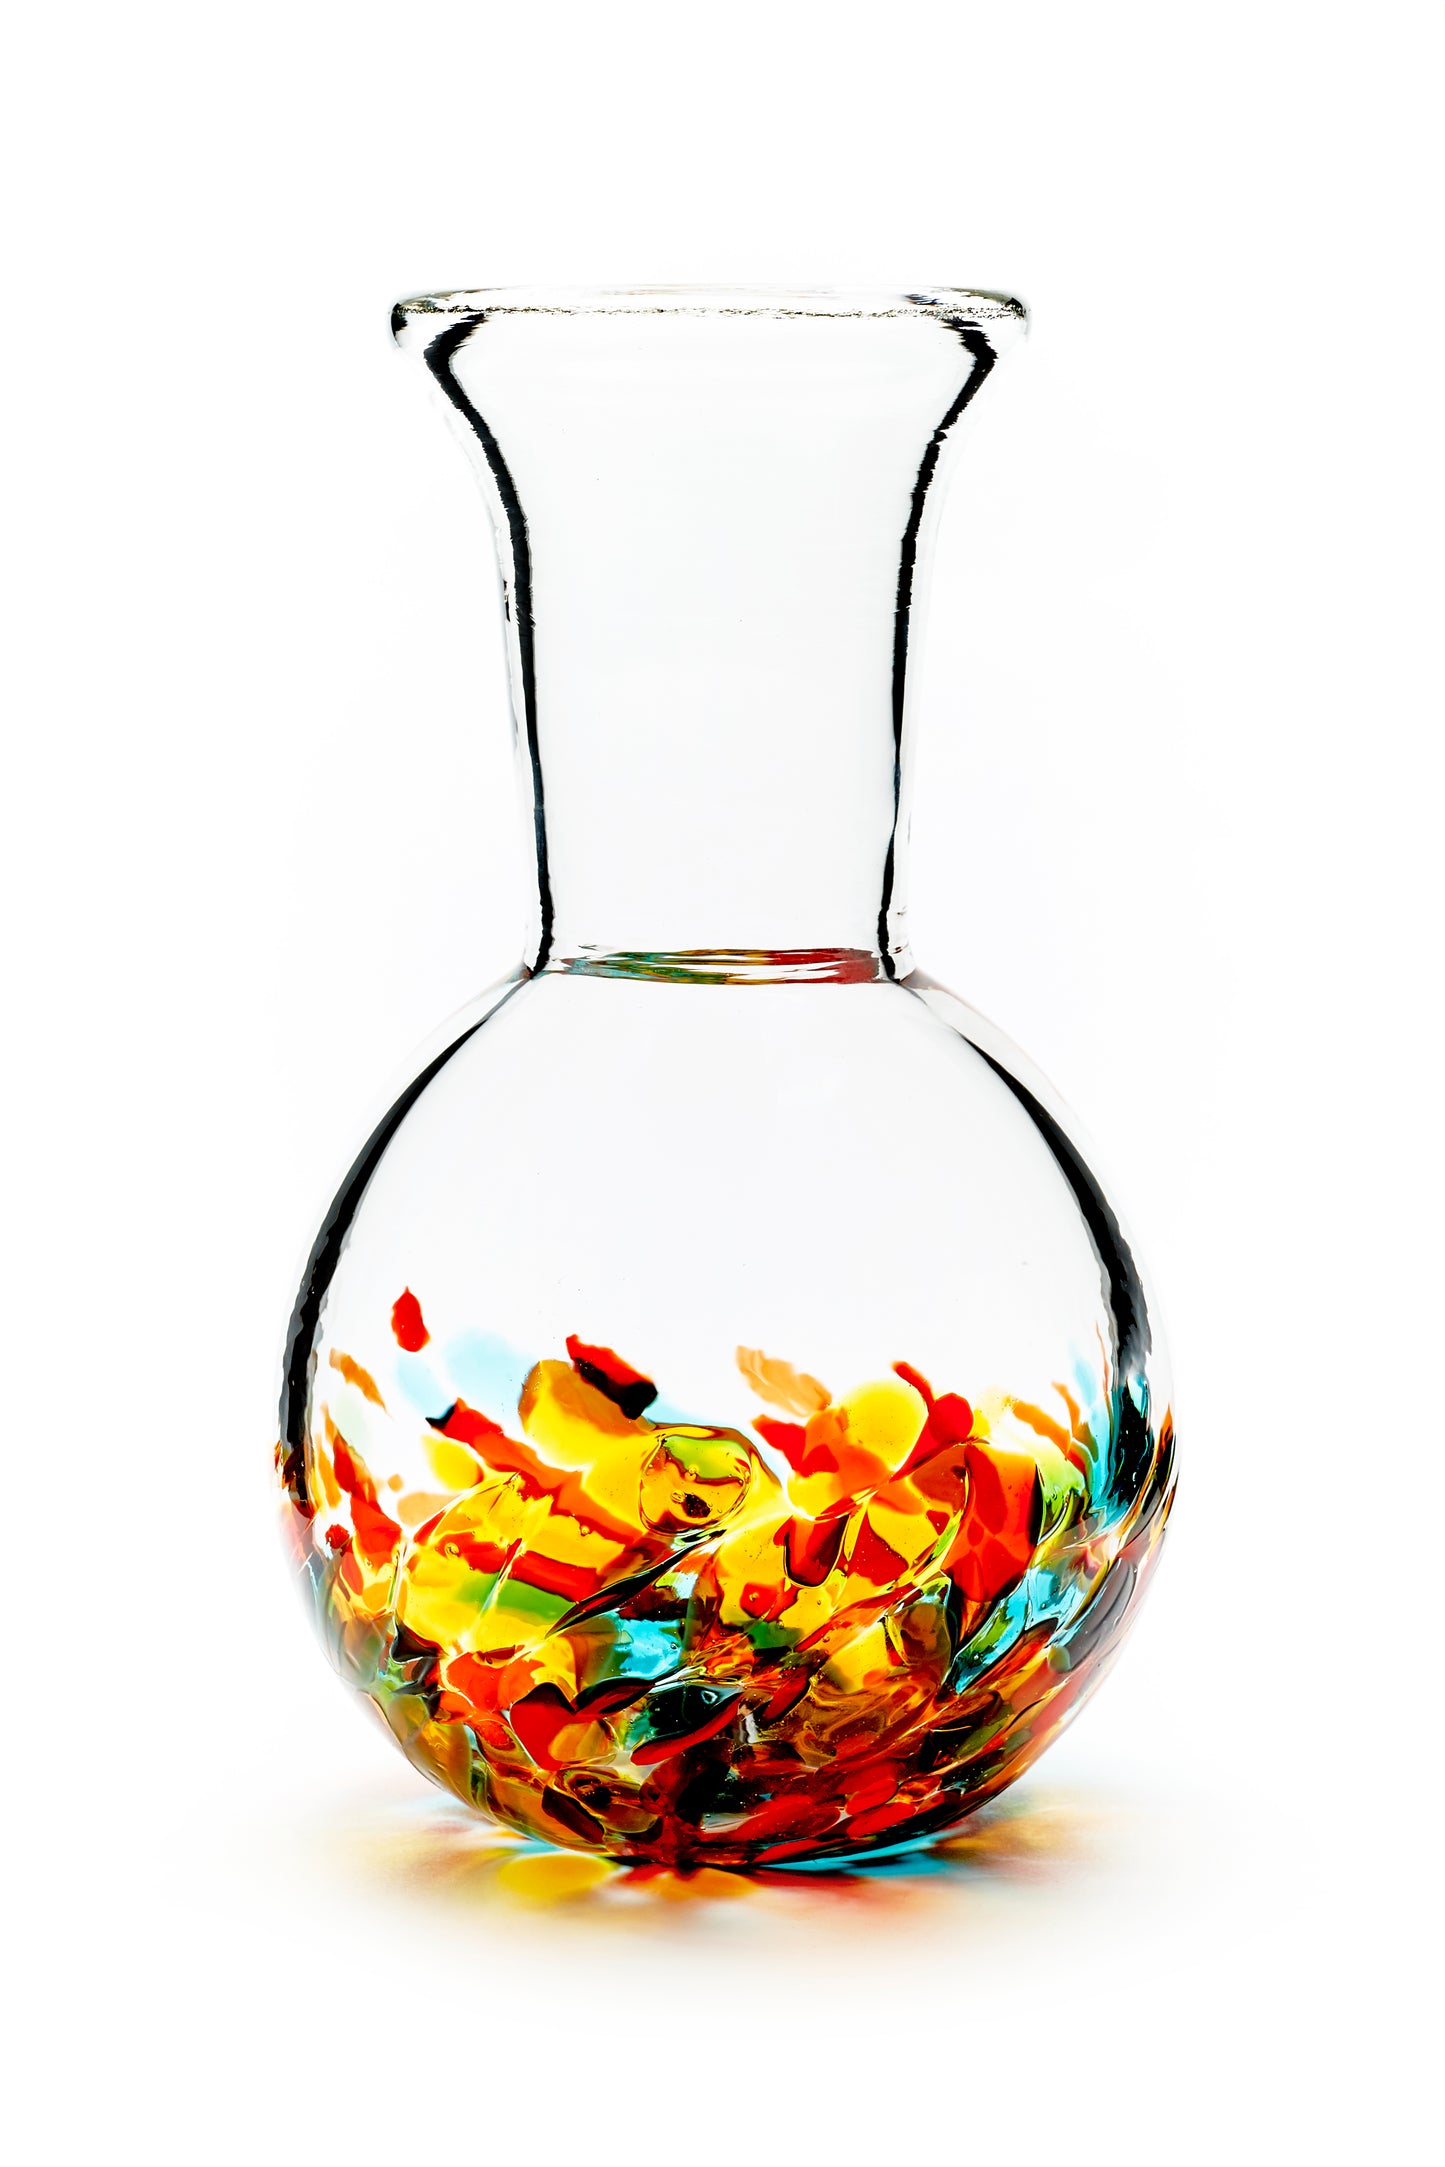 Hand blown glass vase. Yellow, red, orange, and green glass on the bottom. Colour combination is called "Autumn."